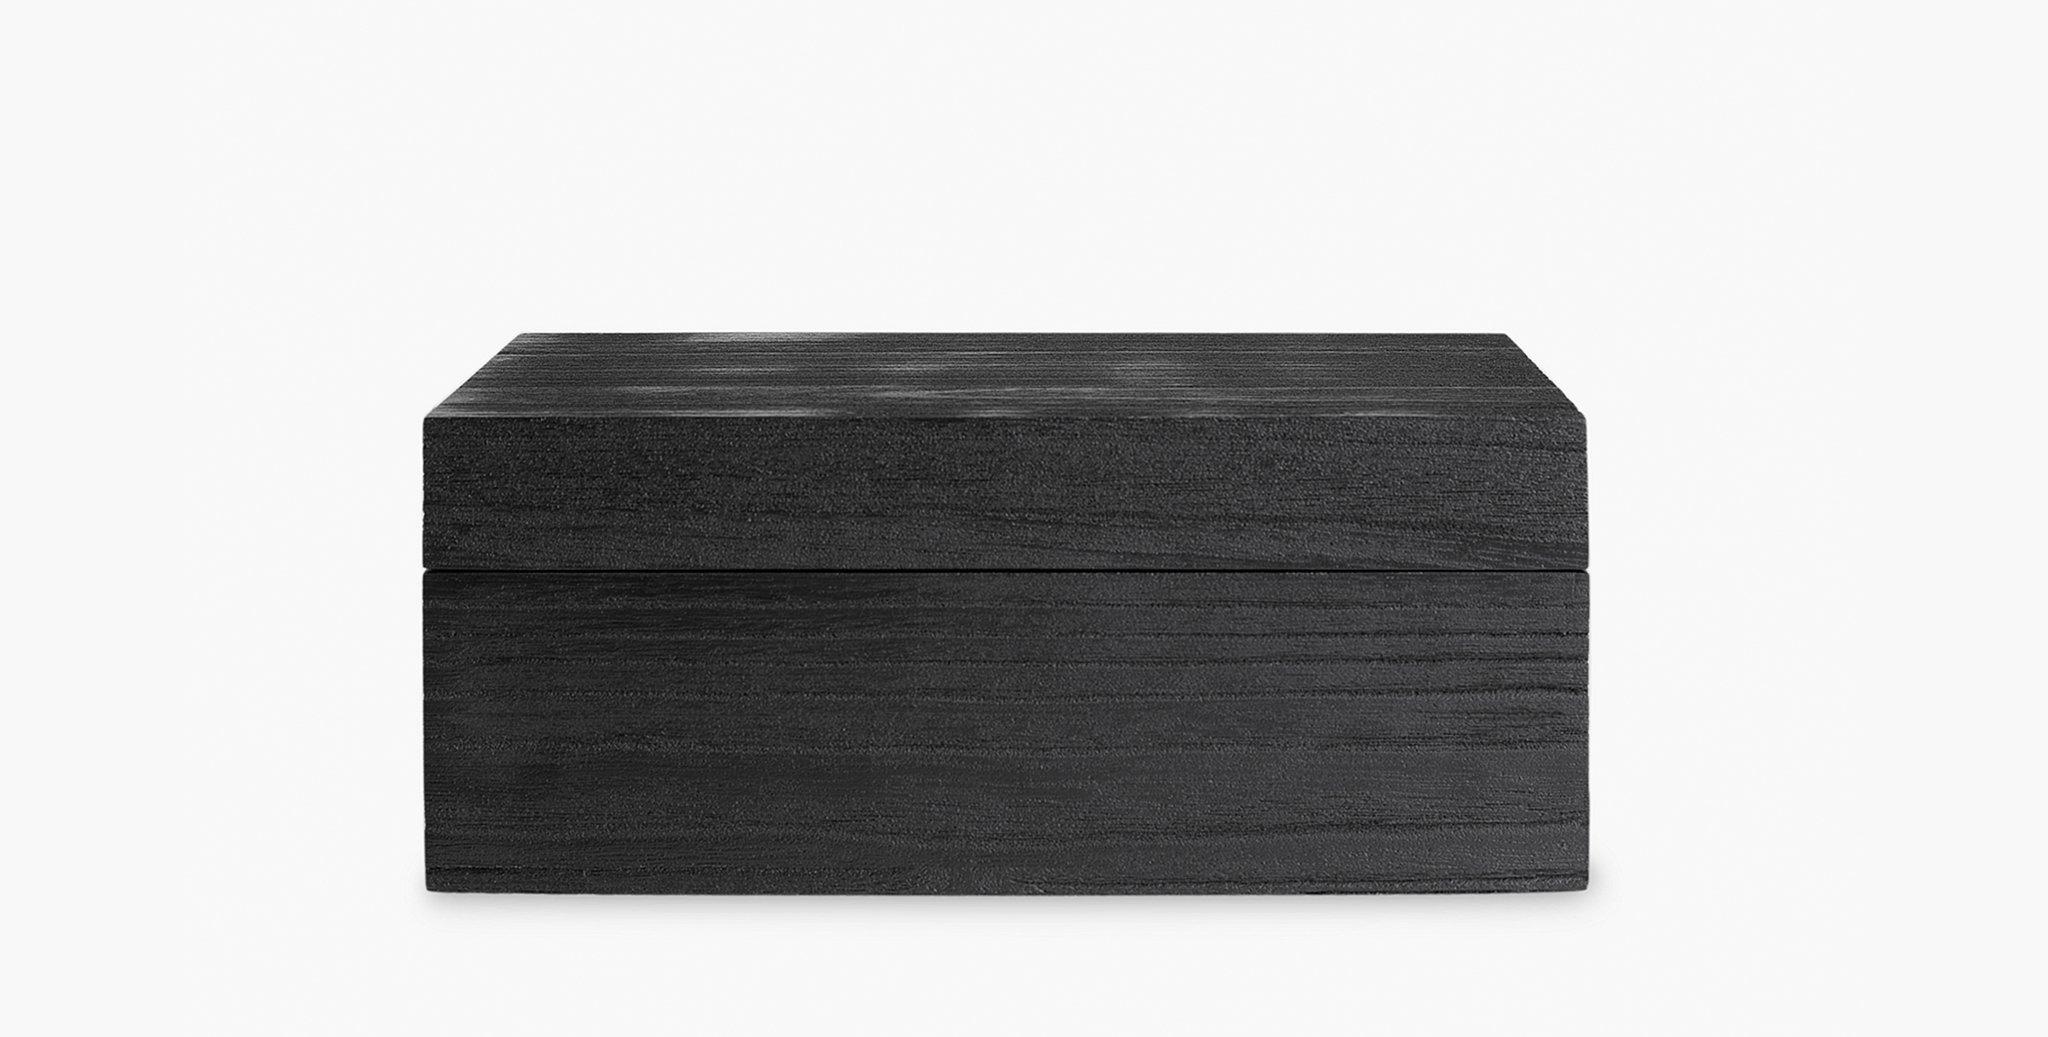 Our Monteserrat Paulowania hinged decorative boxes, are washed in a deep charcoal stain which allows the grain to be prominently highlighted, adding a subtle textural interest to your vignette. A sophisticated organizational option.

Available in